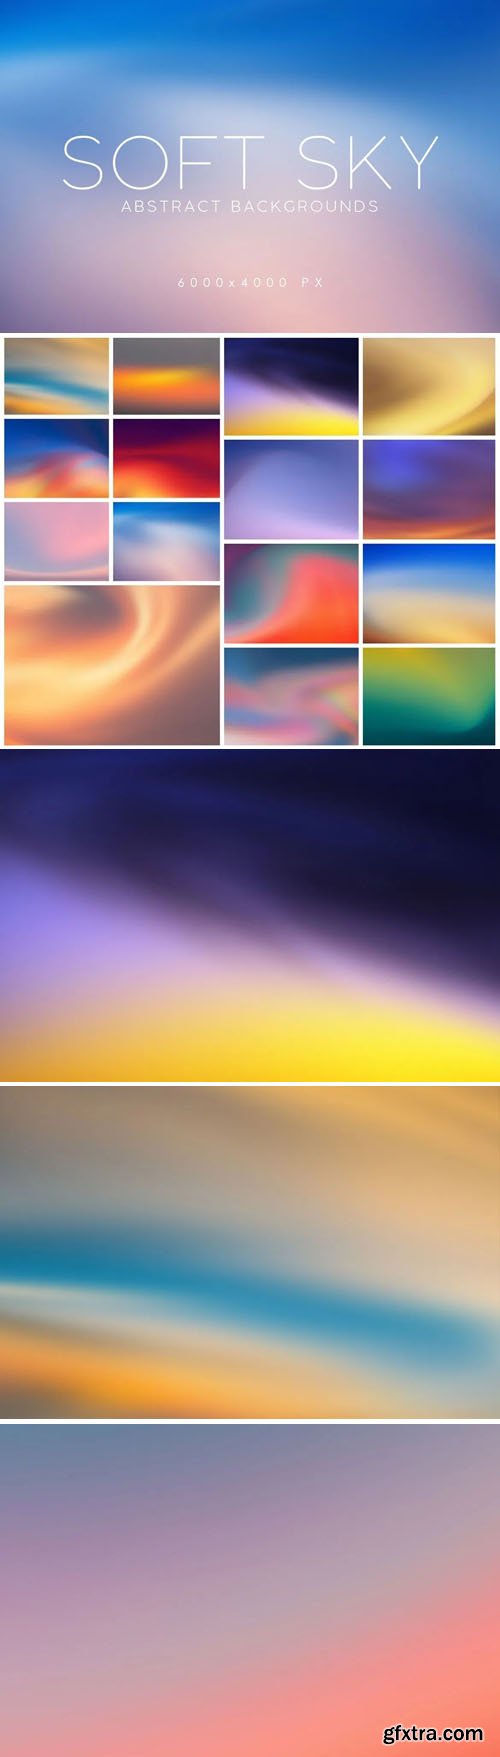 15 Soft Sky Abstract Backgrounds